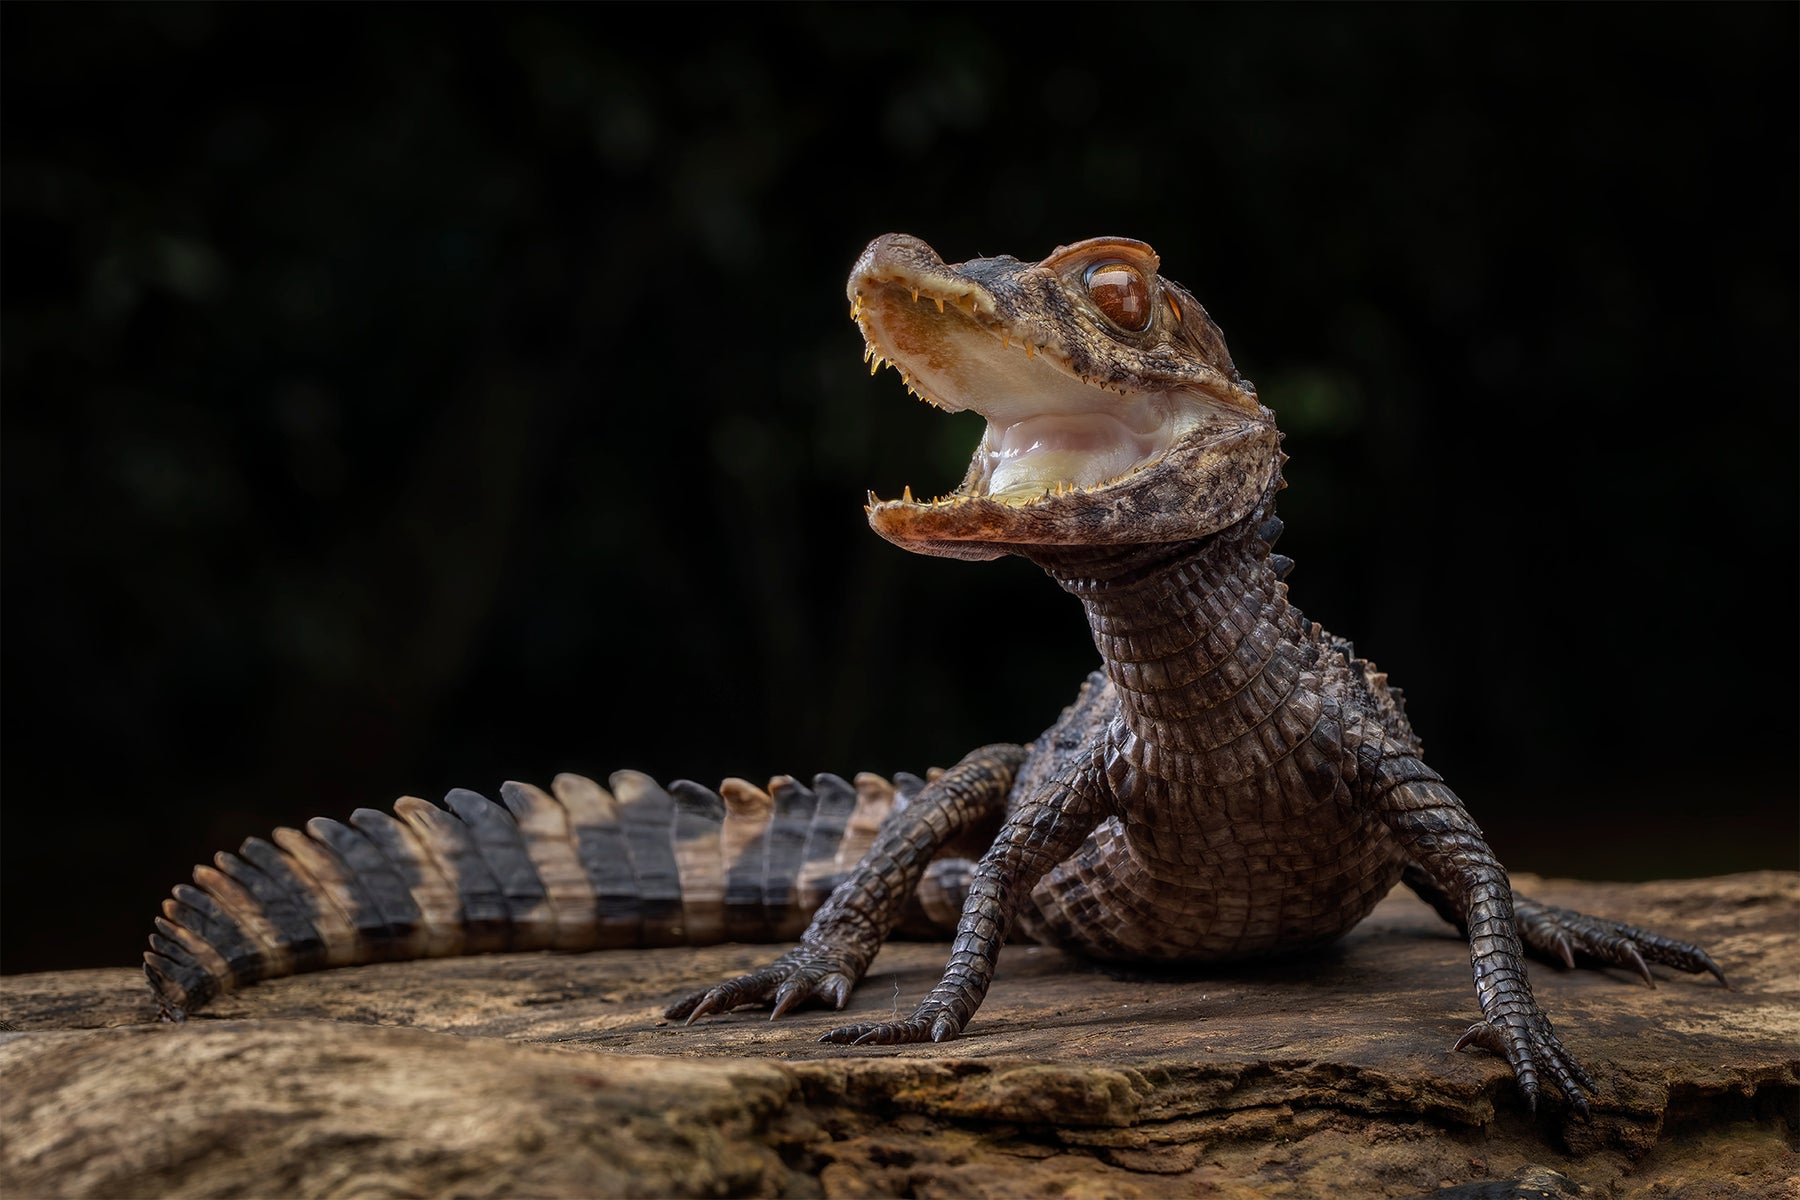 Image of a small Caiman perched on a rock. Caimans inhabit Mexico and Central and South America from marshes and swamps to mangrove rivers and lakes.